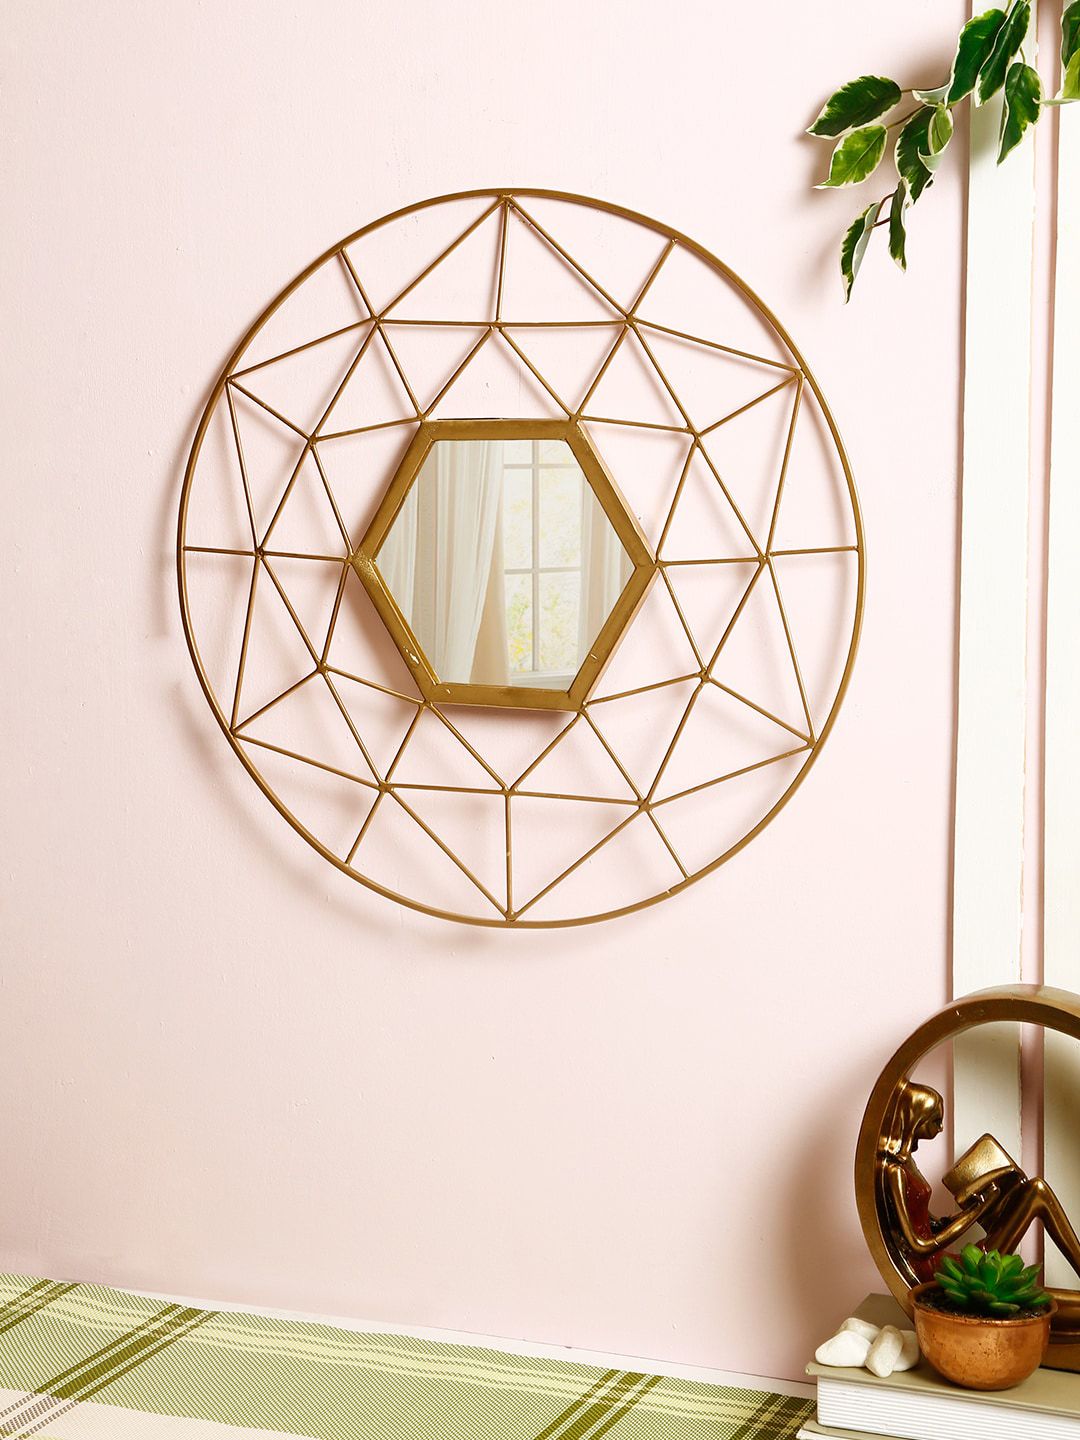 Aapno Rajasthan Gold-Toned Handcrafted Wall Mirror Price in India